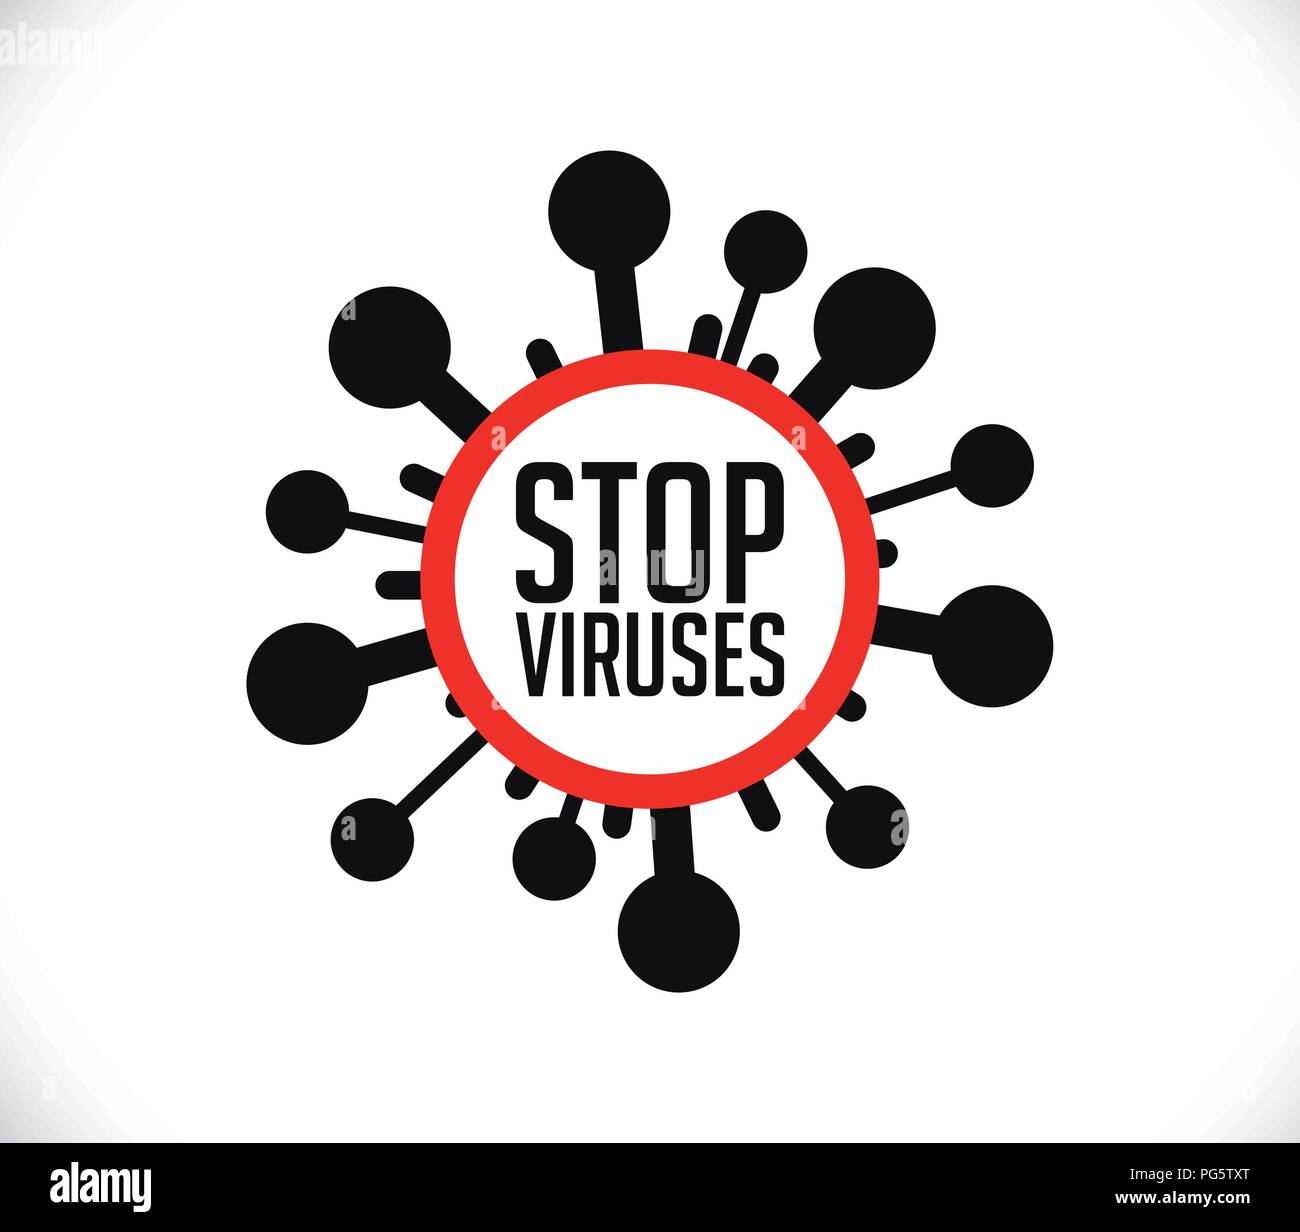 Stop viruses concept icon - medical and healthcare concept Stock Vector